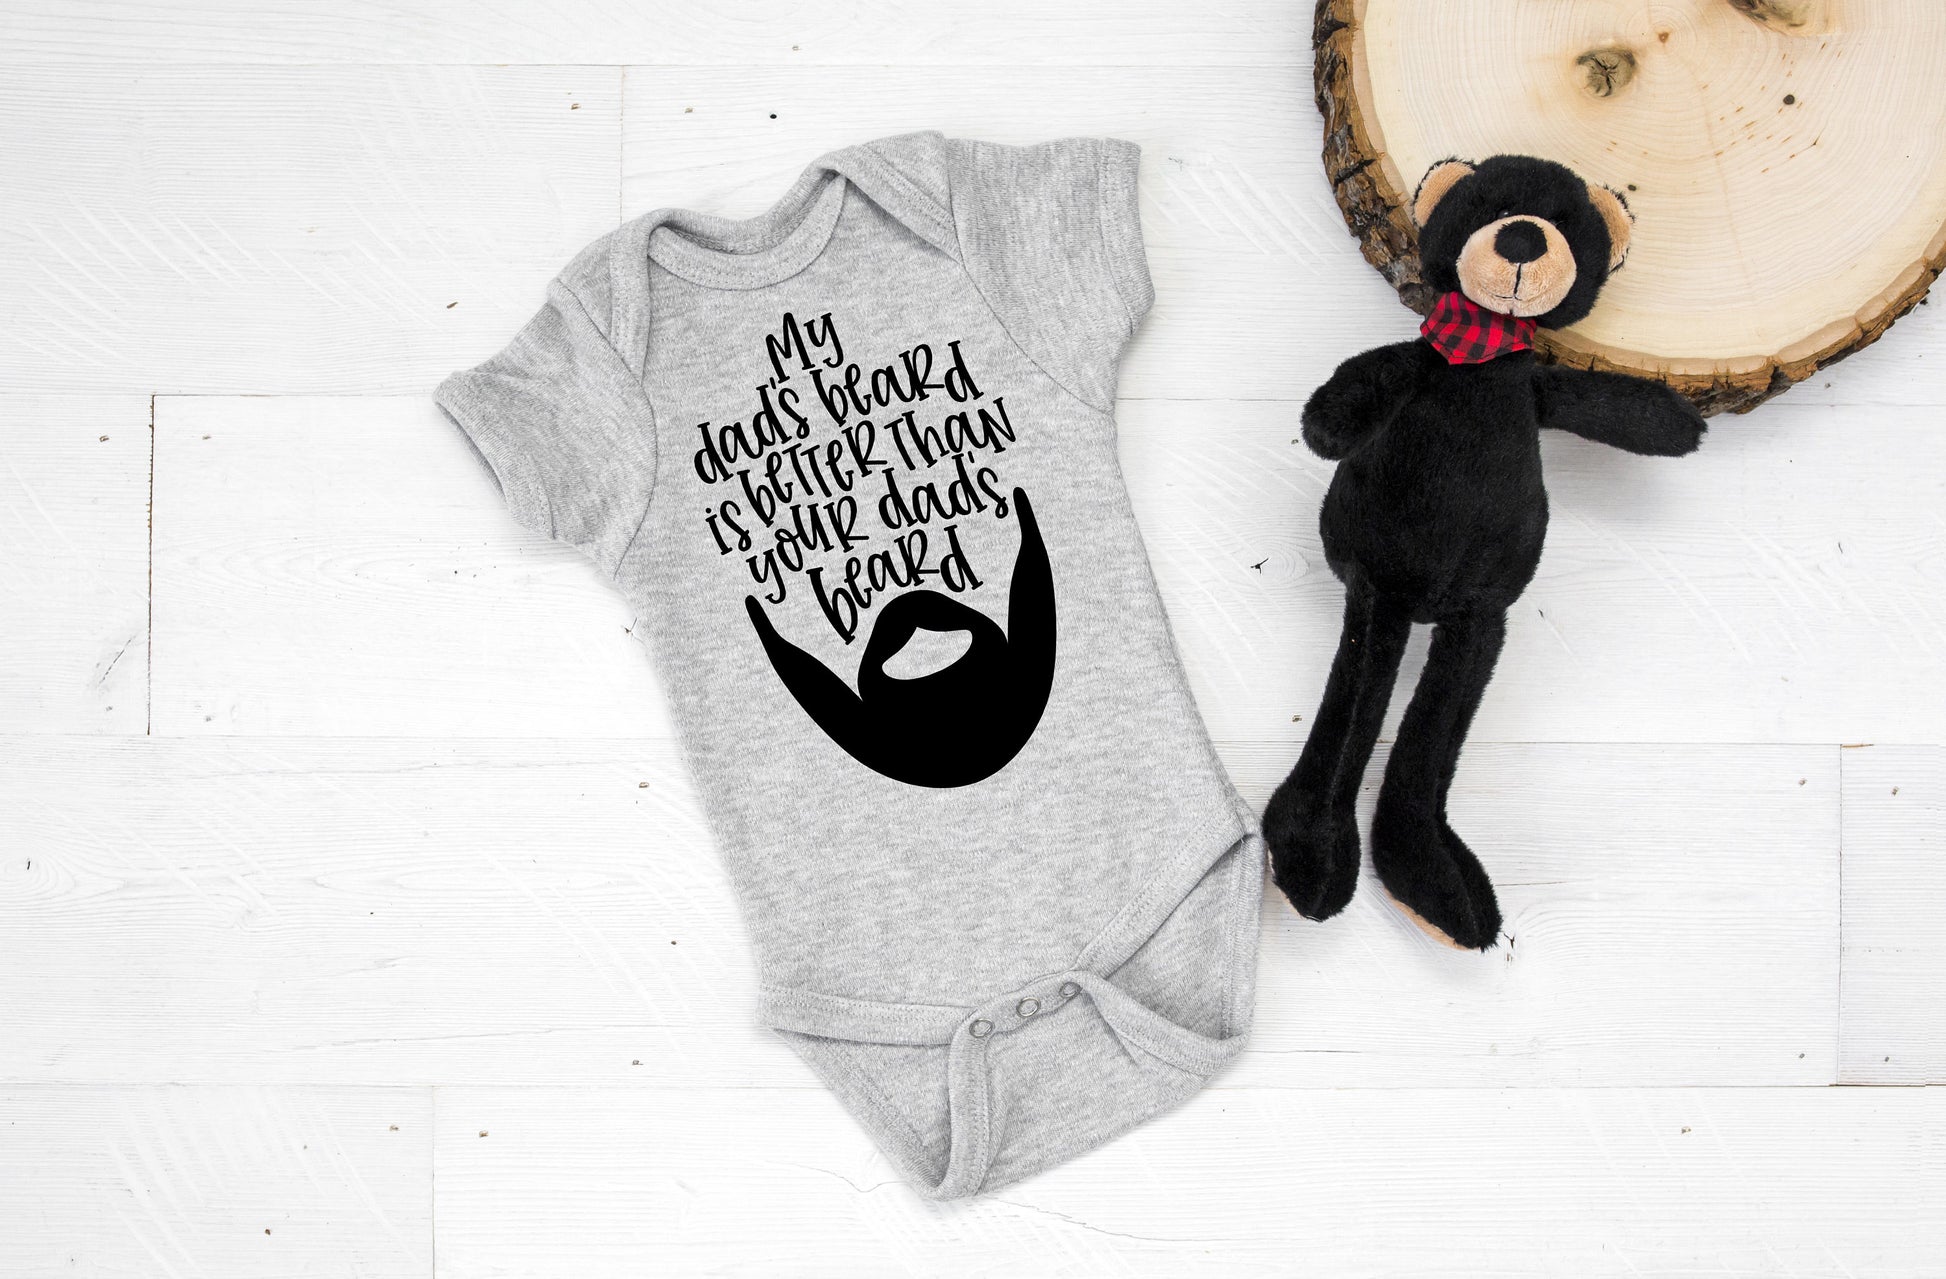 My Dad's Beard is Better Infant or Youth Shirt or Bodysuit - Father's Day Gift - Bearded Dad - I Love Dad - Daddy's Beard Puller